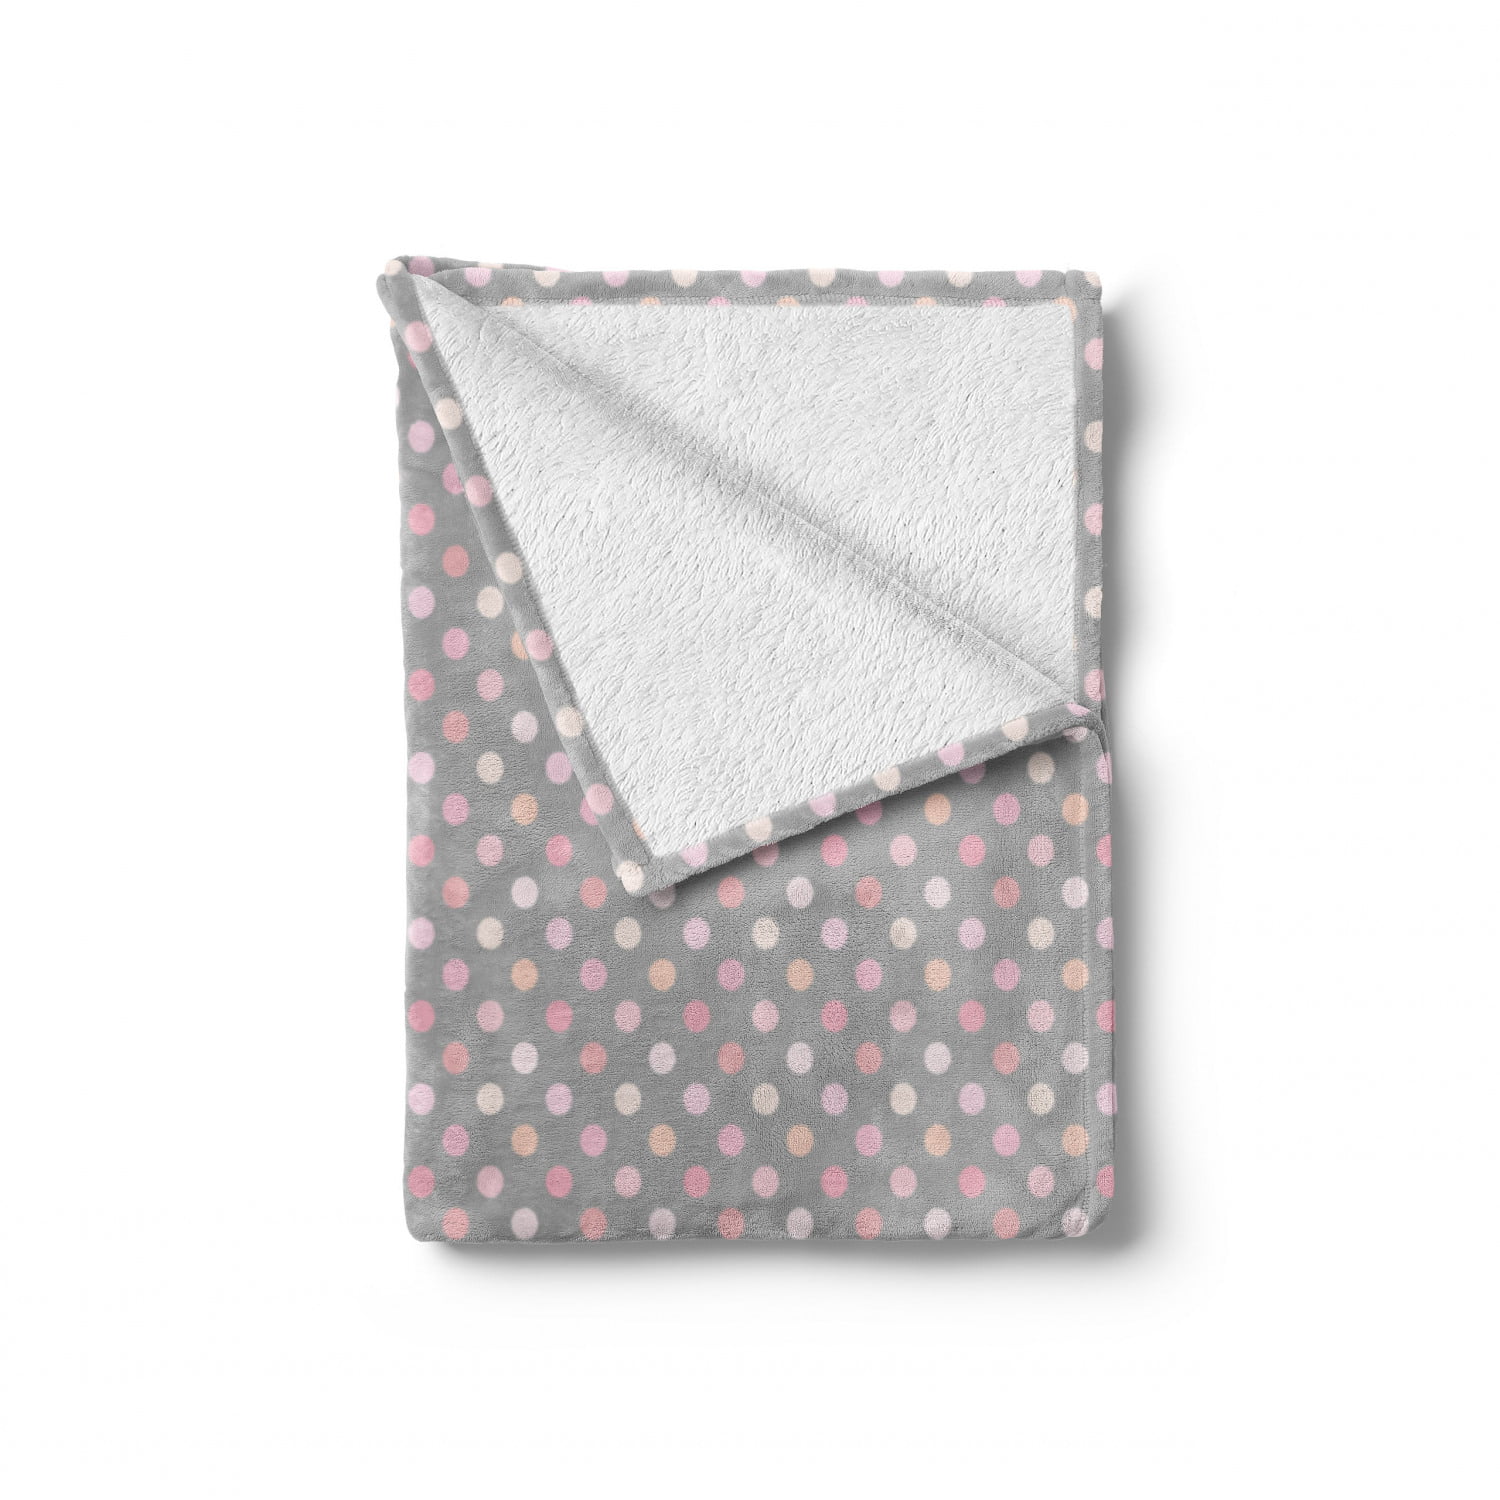 Cozy Plush for Indoor and Outdoor Use Ambesonne Pastel Soft Flannel Fleece Throw Blanket 50 x 60 Taupe Pink Romantic and Continuous Polka Dots in Rosy Shades 